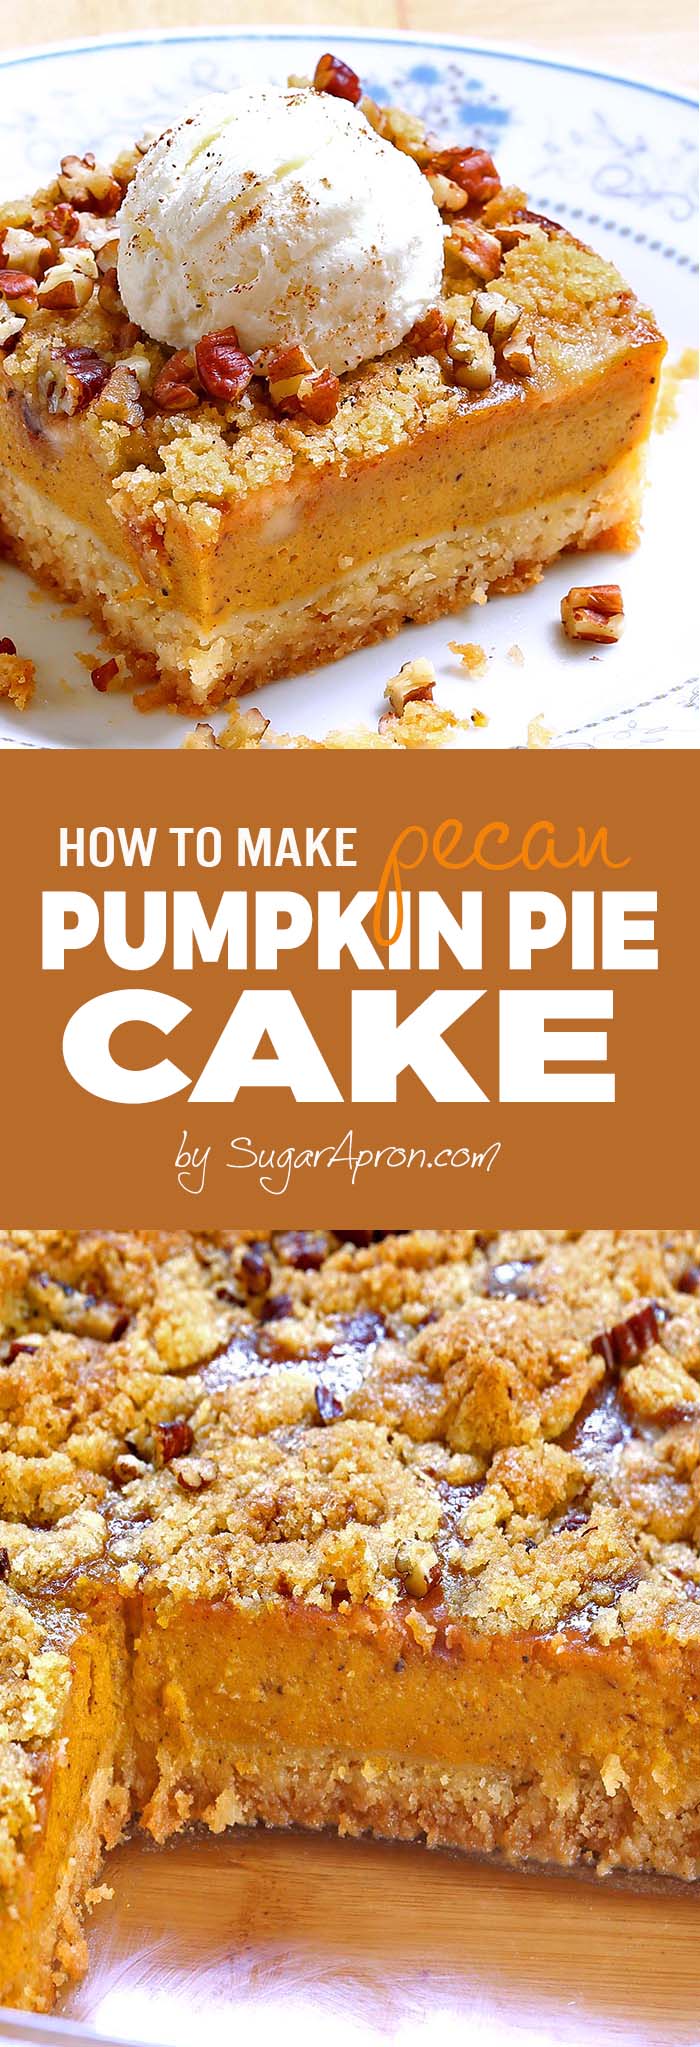 Pumpkin pie cake will be your new favorite pumpkin recipe! All the yummy flavors of a pumpkin pie but the heartiness of a cake.